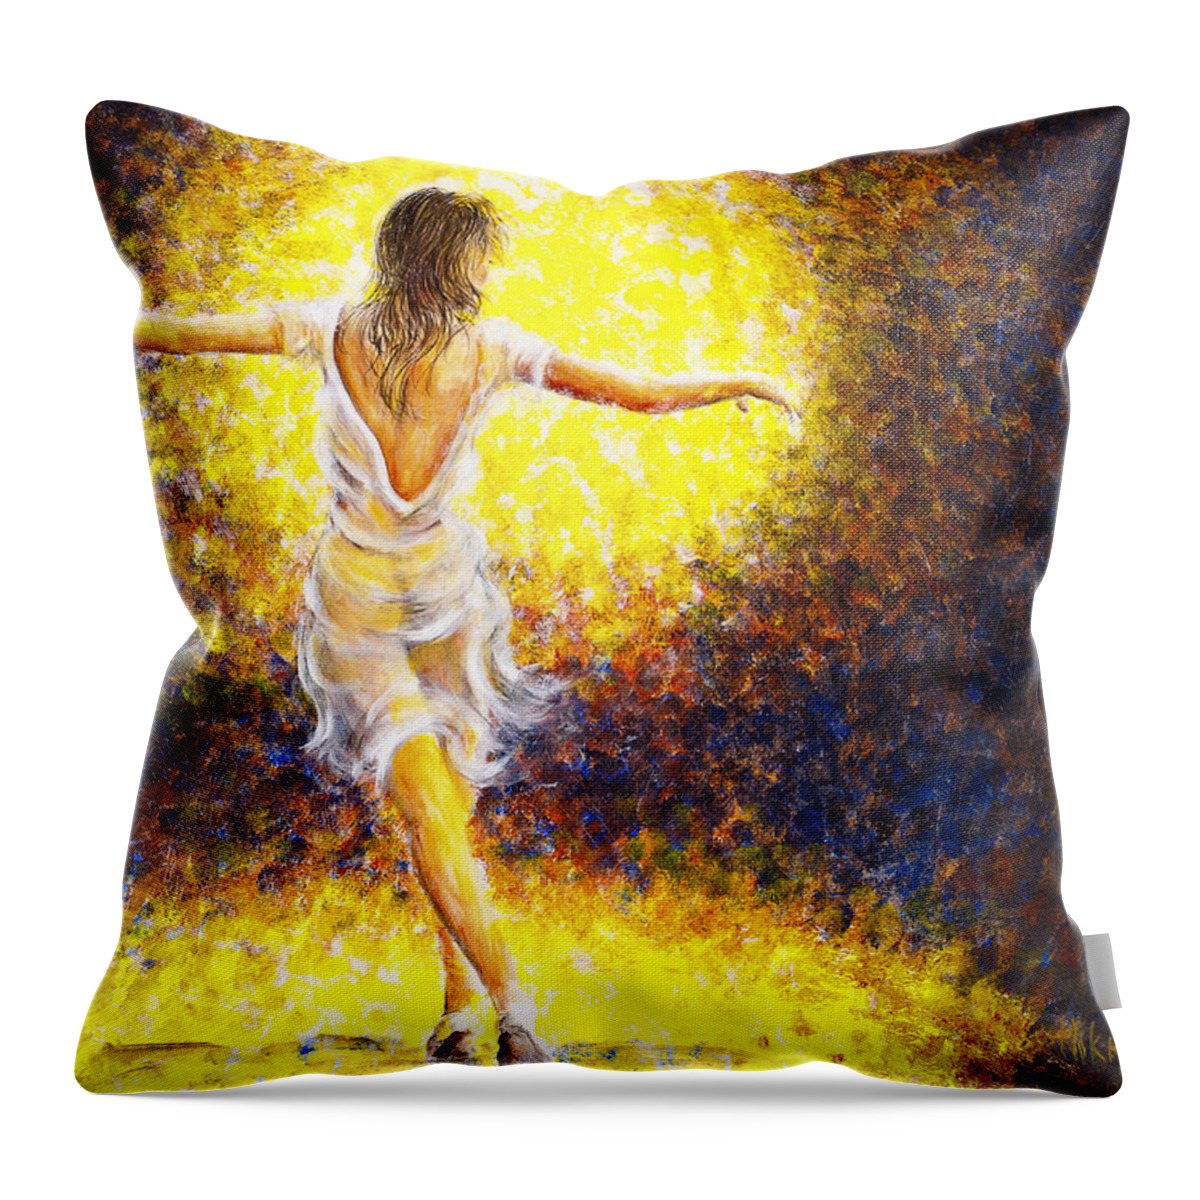 Dancer Throw Pillow featuring the painting Dancer 20 by Nik Helbig